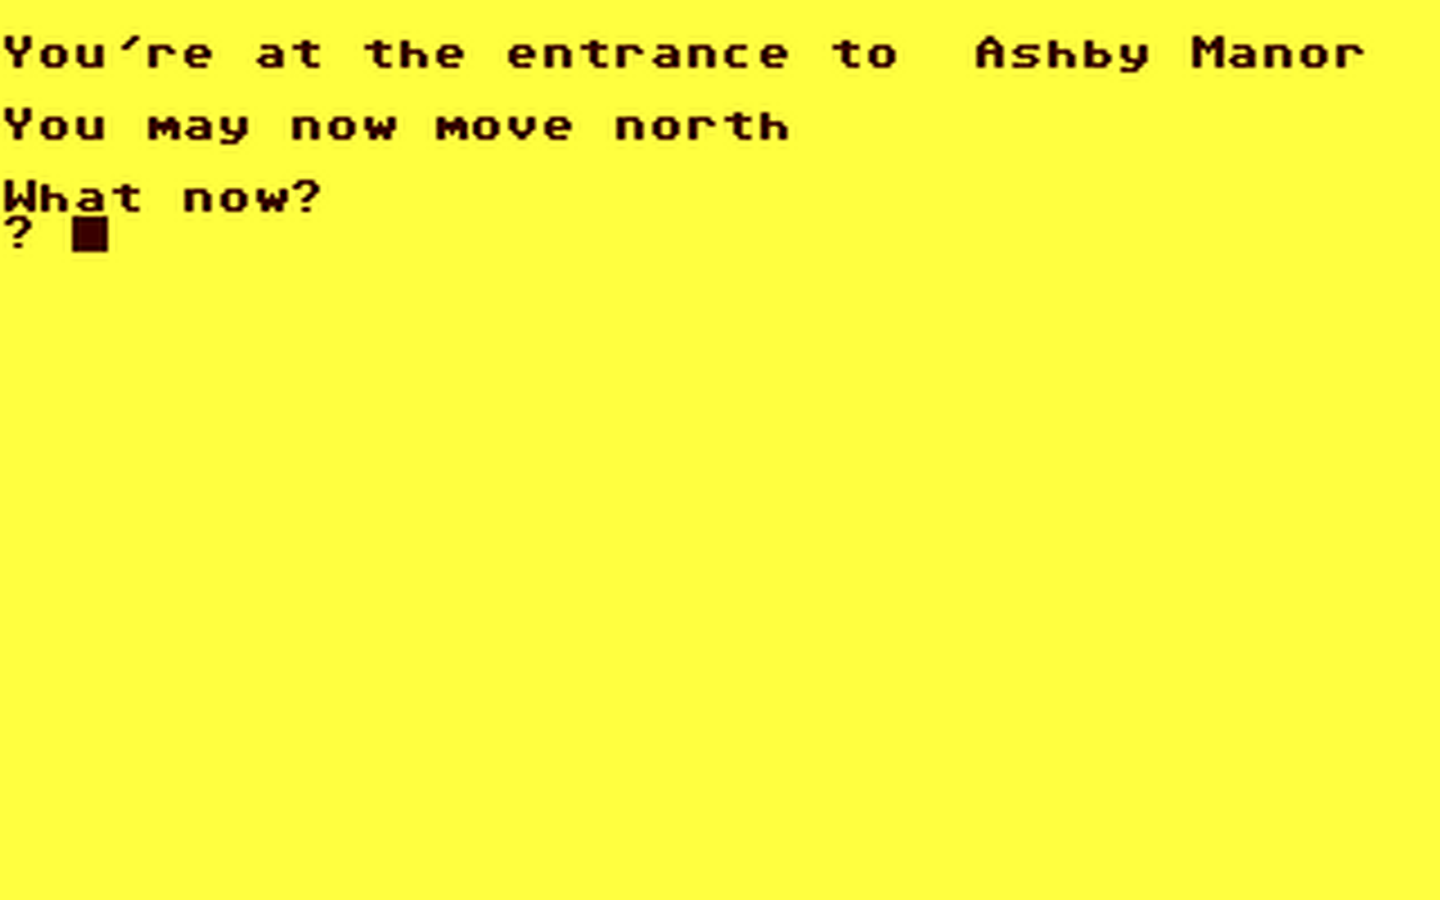 C64 GameBase Ashby_Manor The_Guild_Adventure_Software